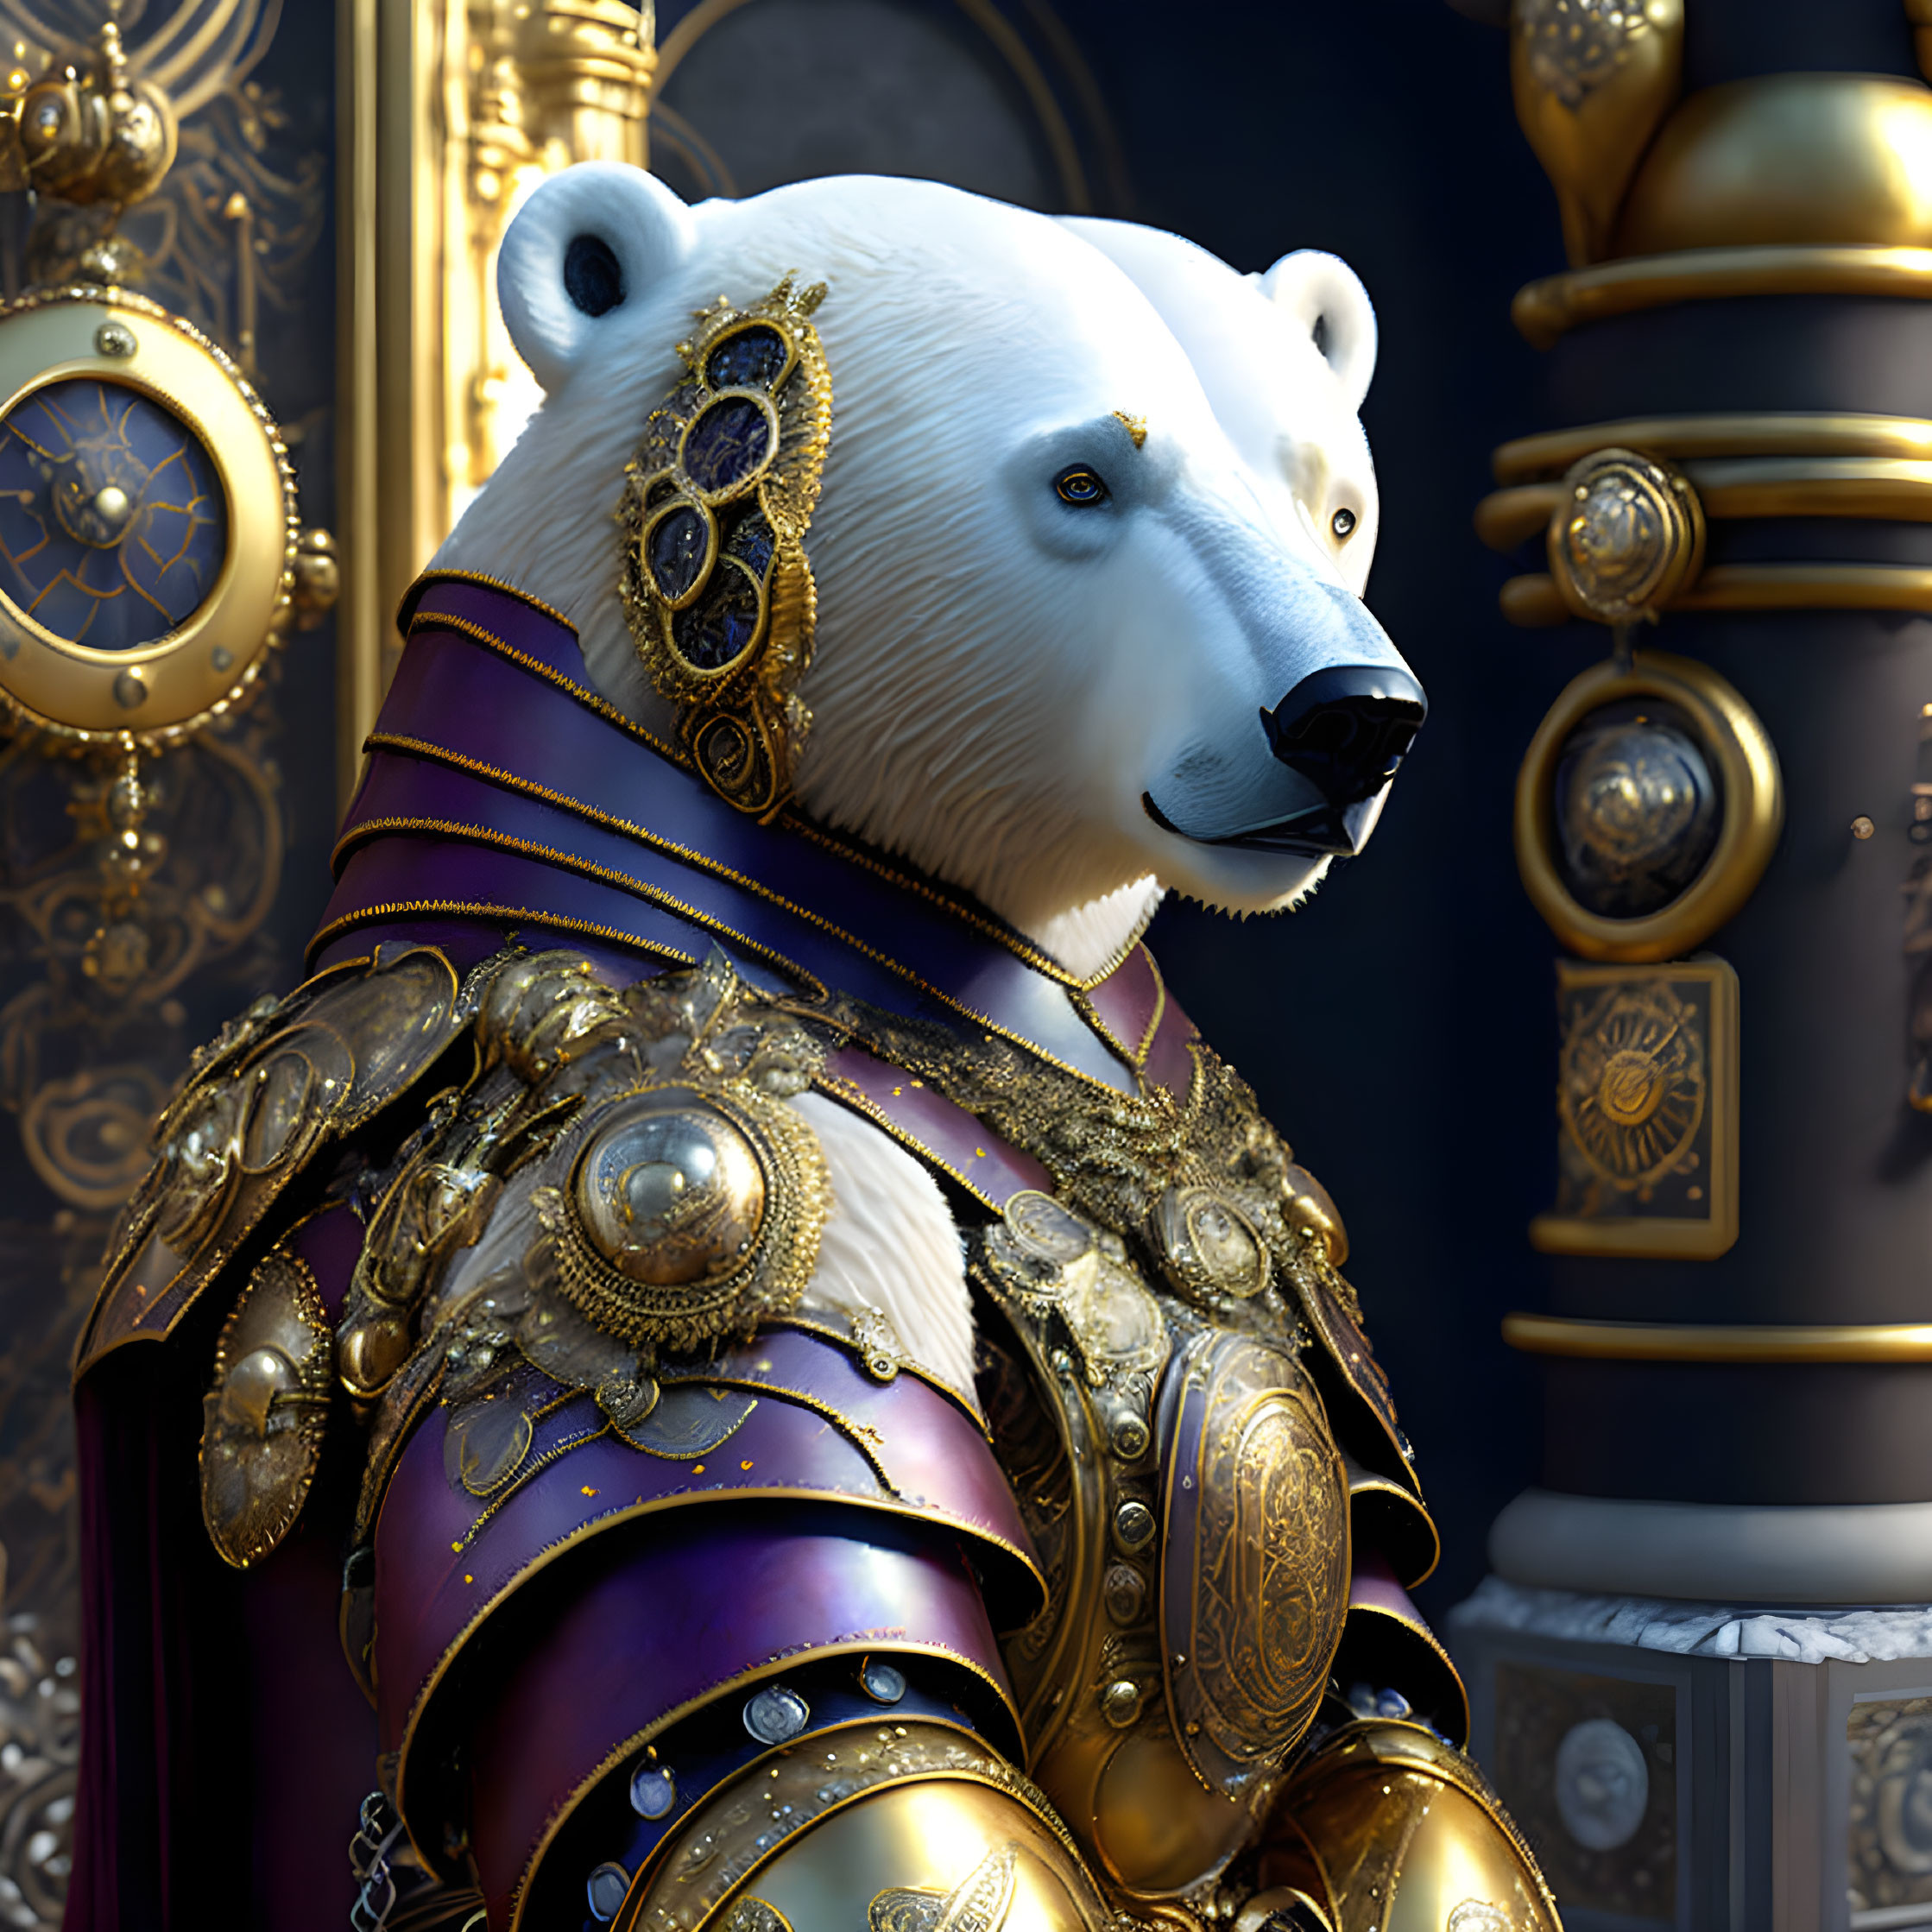 Armored polar bear with golden details and purple cape in classical setting